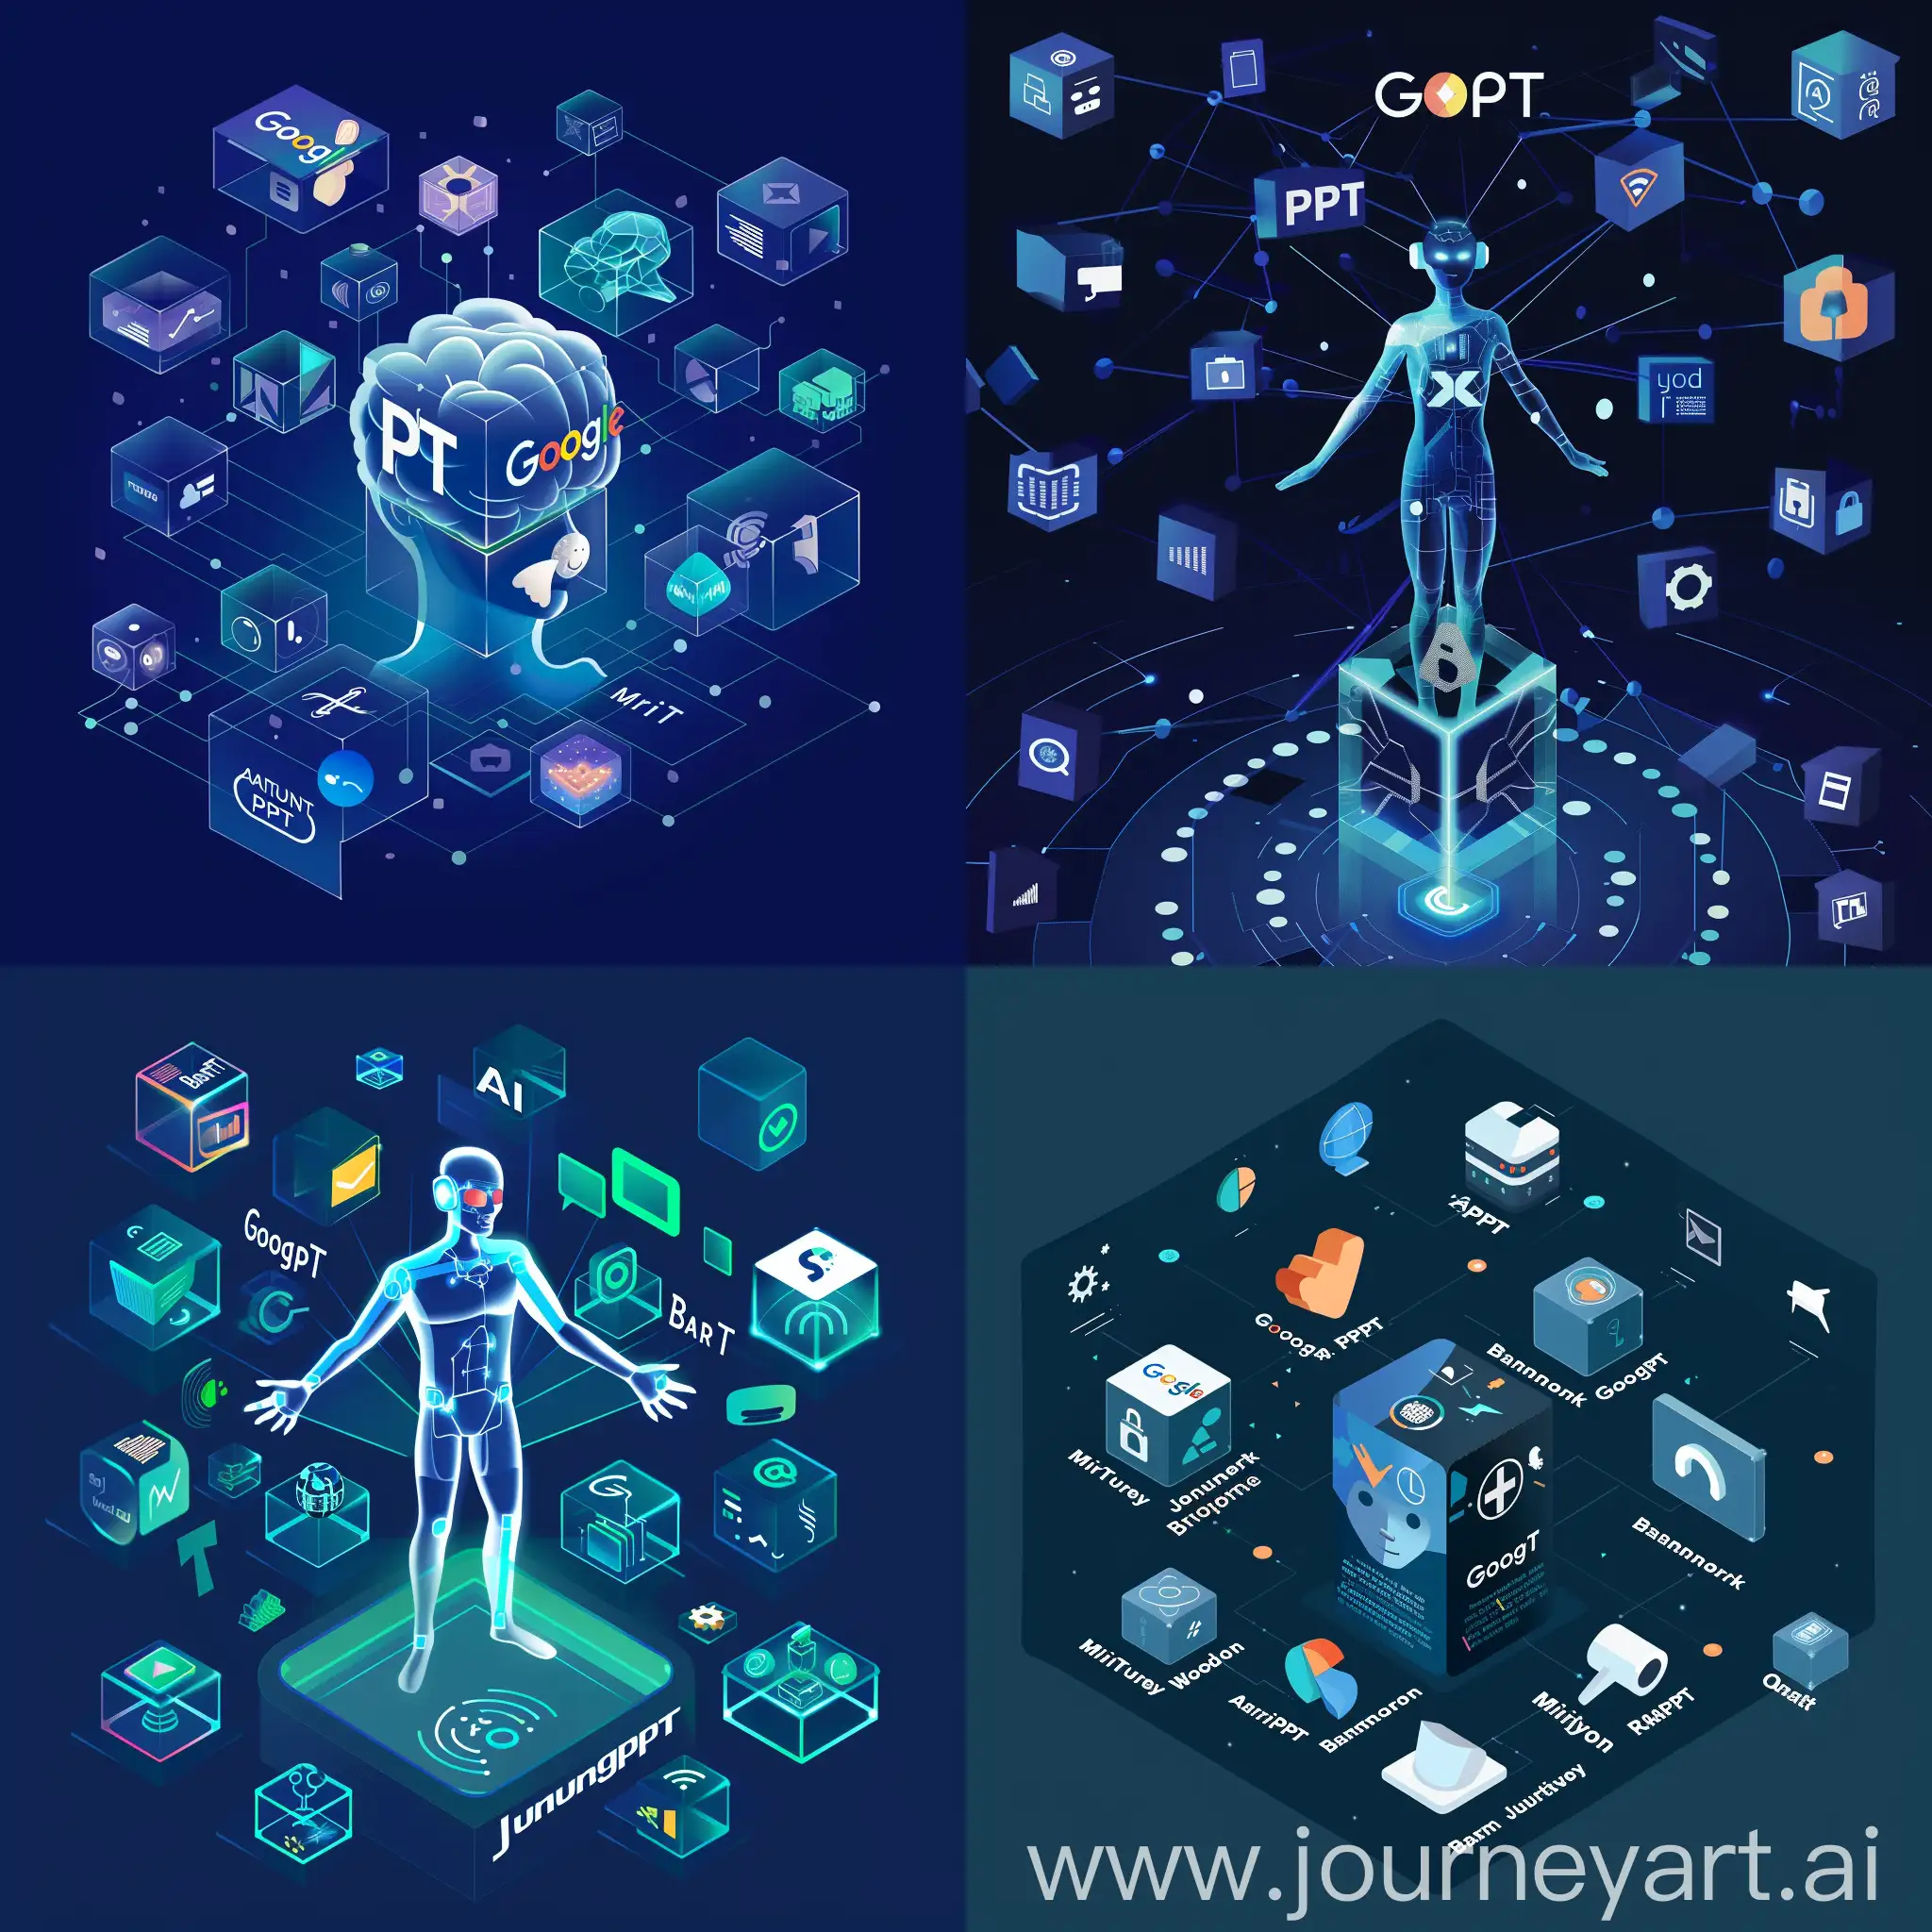 Please make me an image with a dark blue background of an AI human in a fully technological and AI environment. Around this human, 3D symbols, icons and icons with glass style in the form of a cube from popular artificial intelligence sites such as ChatGPT, Google Bard, Brandmark, WordTune, MidJourney, Craiyon and WriteSonic are immersed and wander. The symbols of artificial intelligence tools must be used.